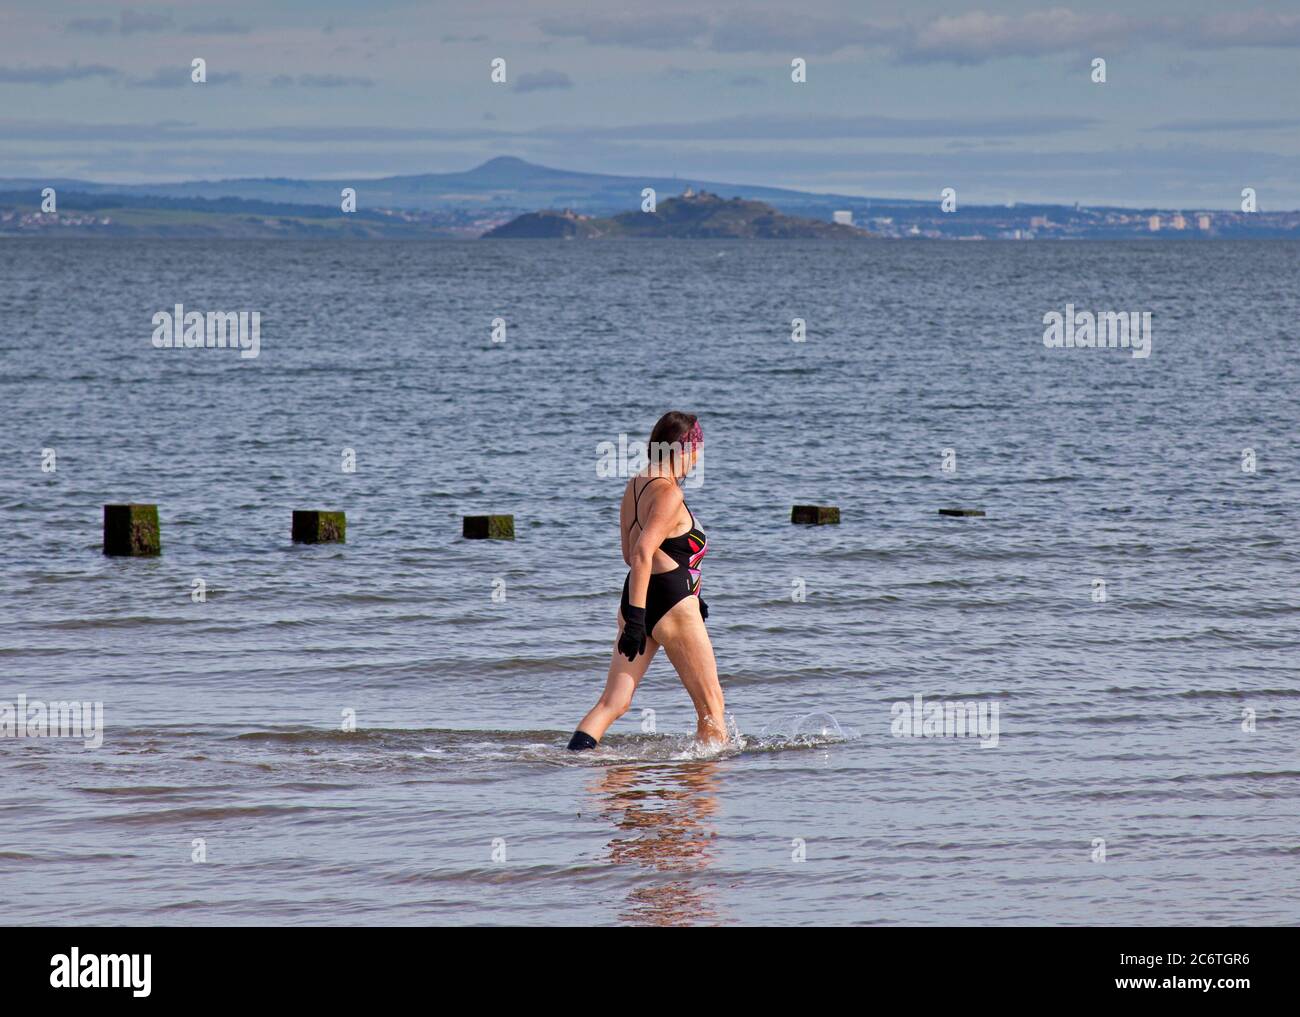 Portobello, Edinburgh, Scotland, UK 12 July 2020.Temperature 13 degrees in the morning rising to 18 degrees in afternoon with very little breeze. Over the last three months of the Coronavirus pandemic  people of all ages have healthier pursuits in their leisure time as well as the regular wild swimmer pictured taking a regular dip in the Firth of Forth. Stock Photo